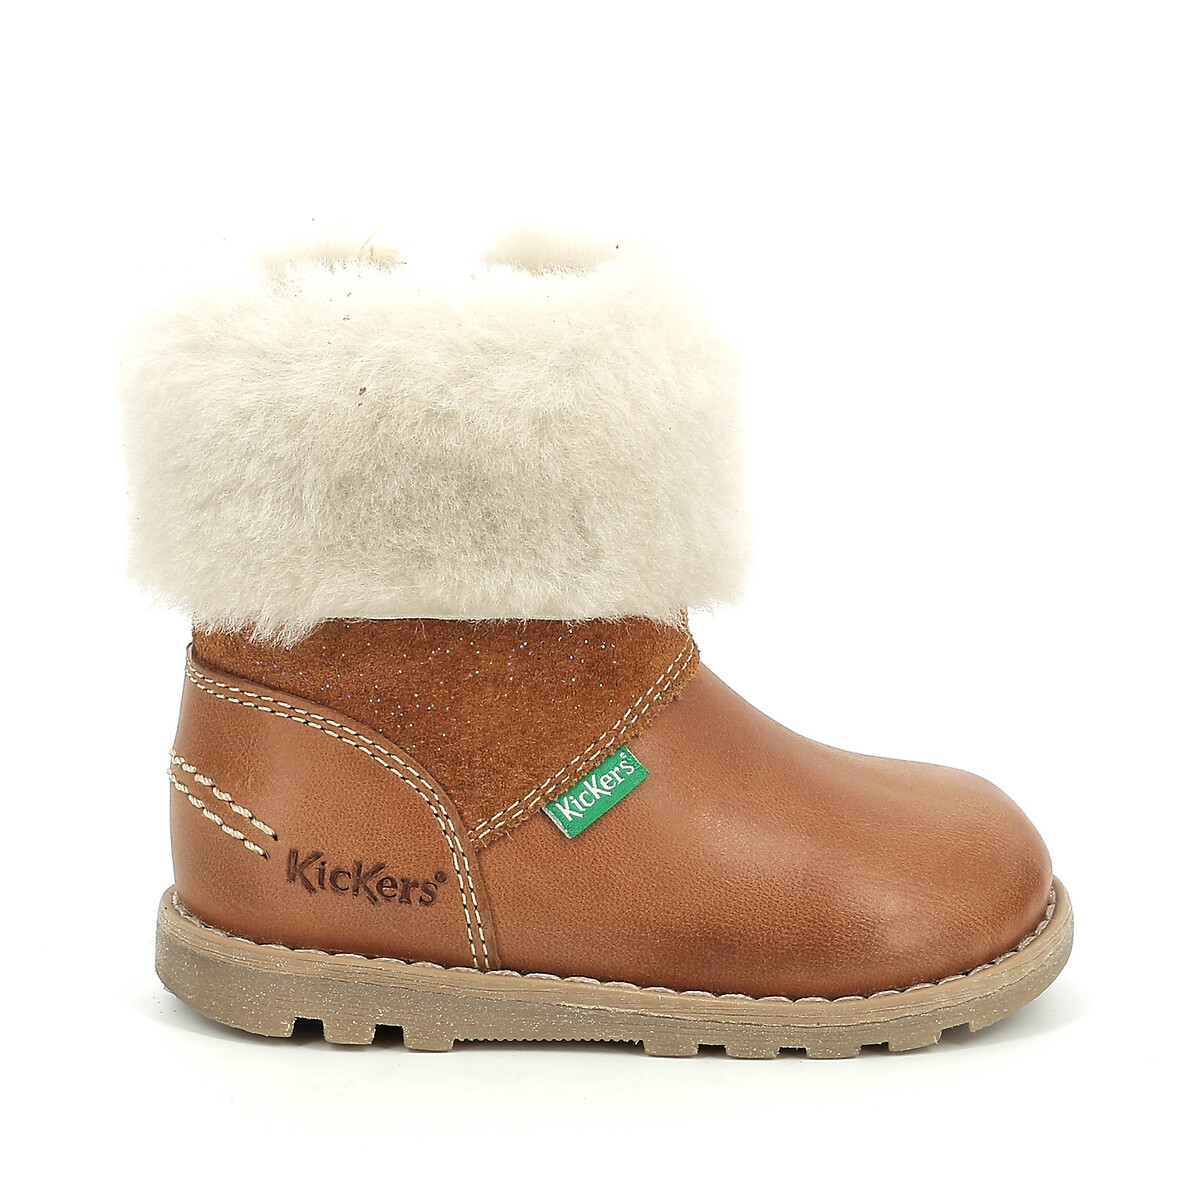 Kids Nonofur Leather Calf Boots with Faux Fur Lining